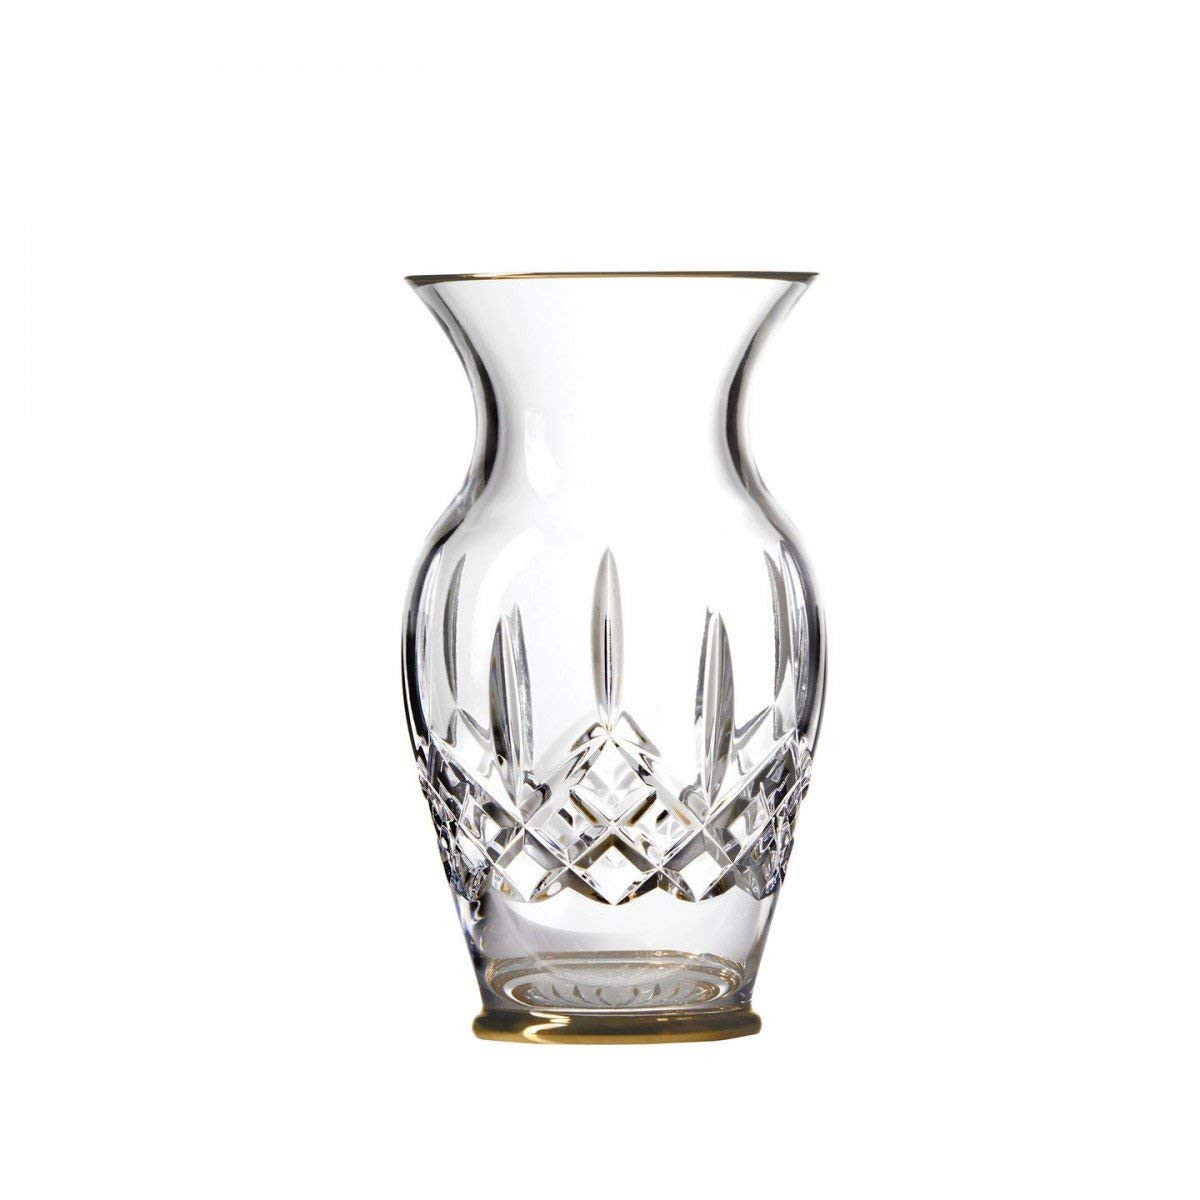 25 Spectacular Waterford Lismore Diamond 8 Vase 2024 free download waterford lismore diamond 8 vase of amazon com waterford lismore gold vase 8 garden outdoor for 61n8zlsbucl sl1200